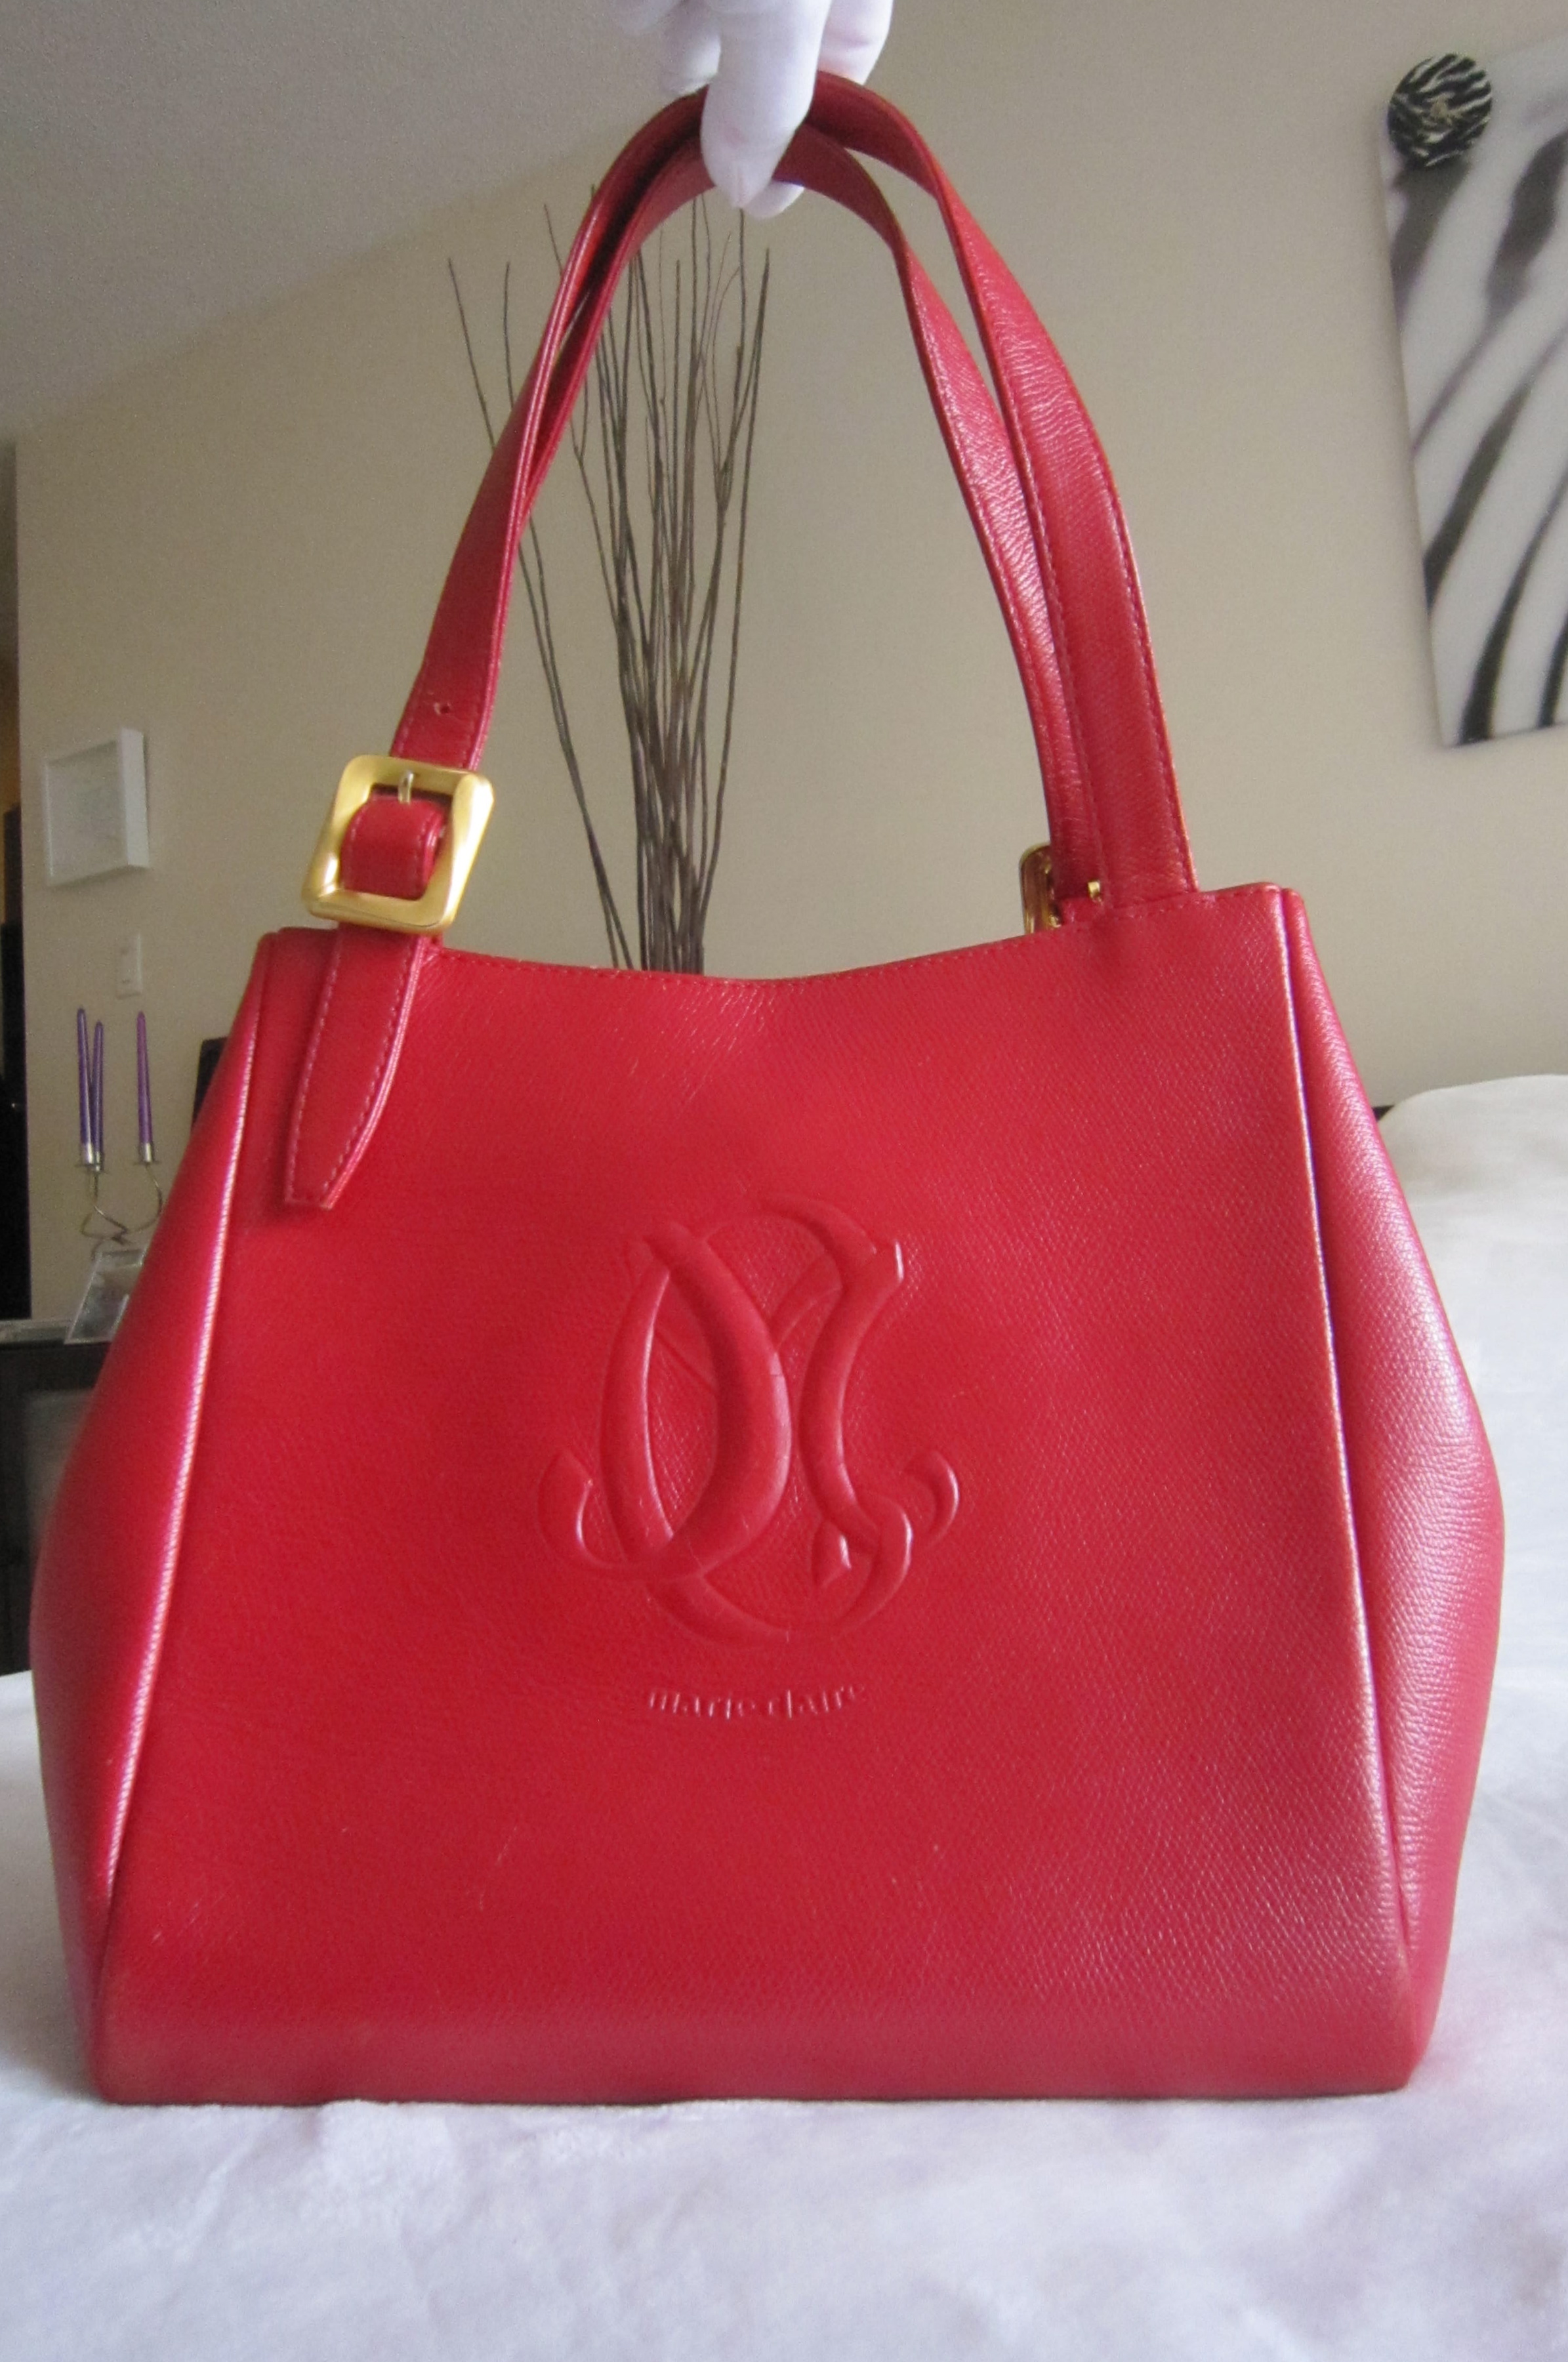 Marie Claire Vintage Red Leather Tote Bag